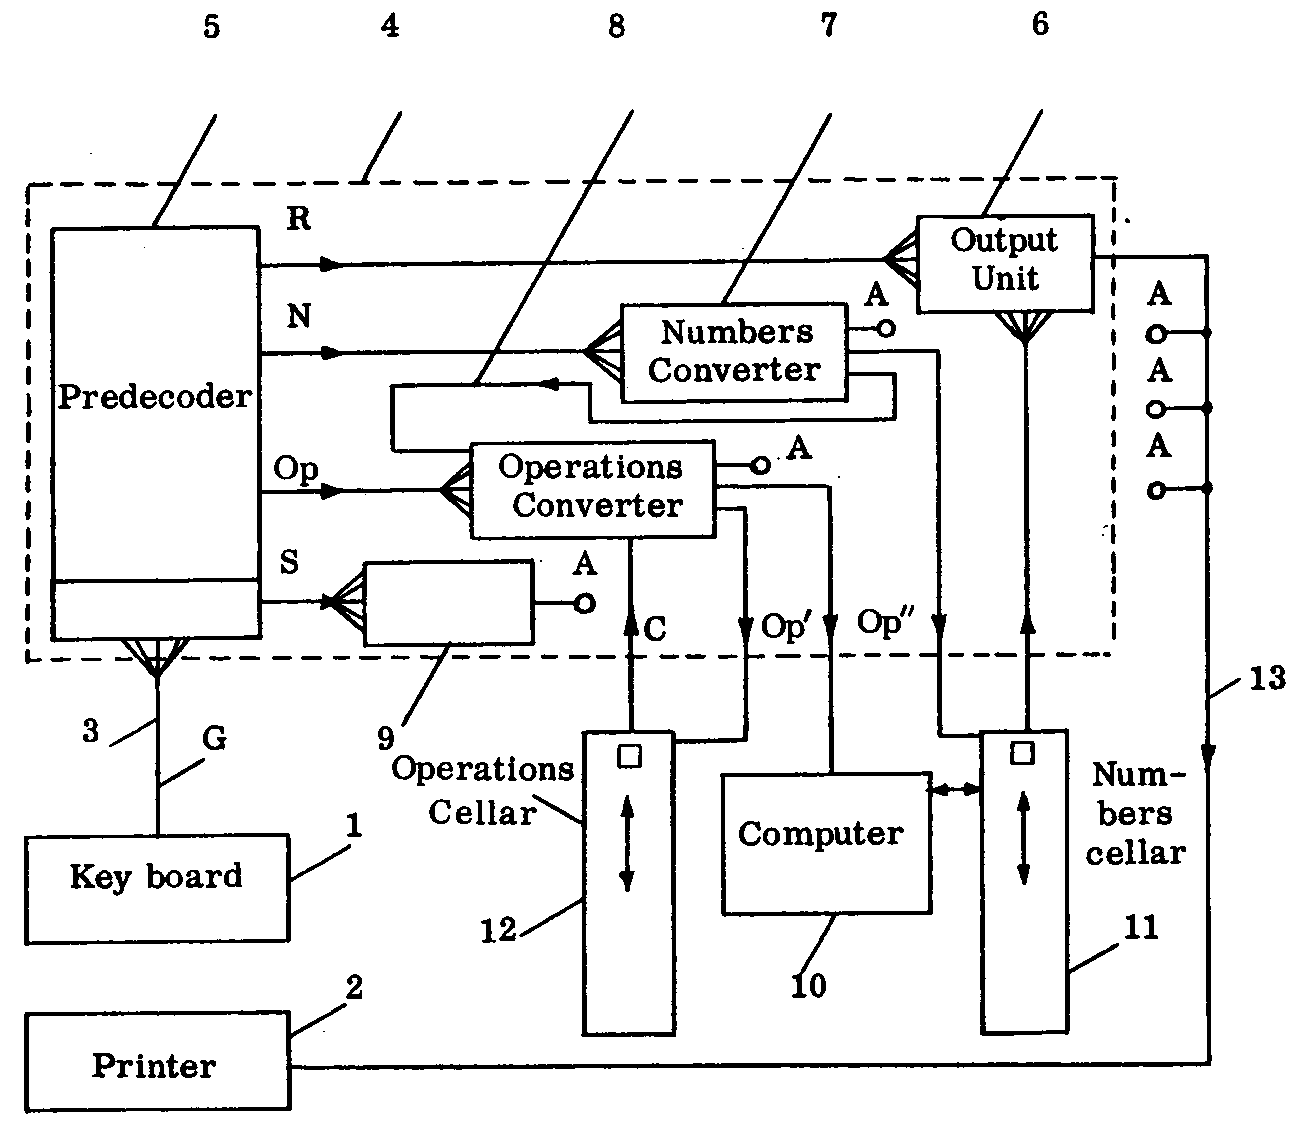 A diagram of the simple calculator designed by Bauer and Samelson in the 1950s.(Samelson & Bauer, 1962, p. 208) They called a stack a cellar.